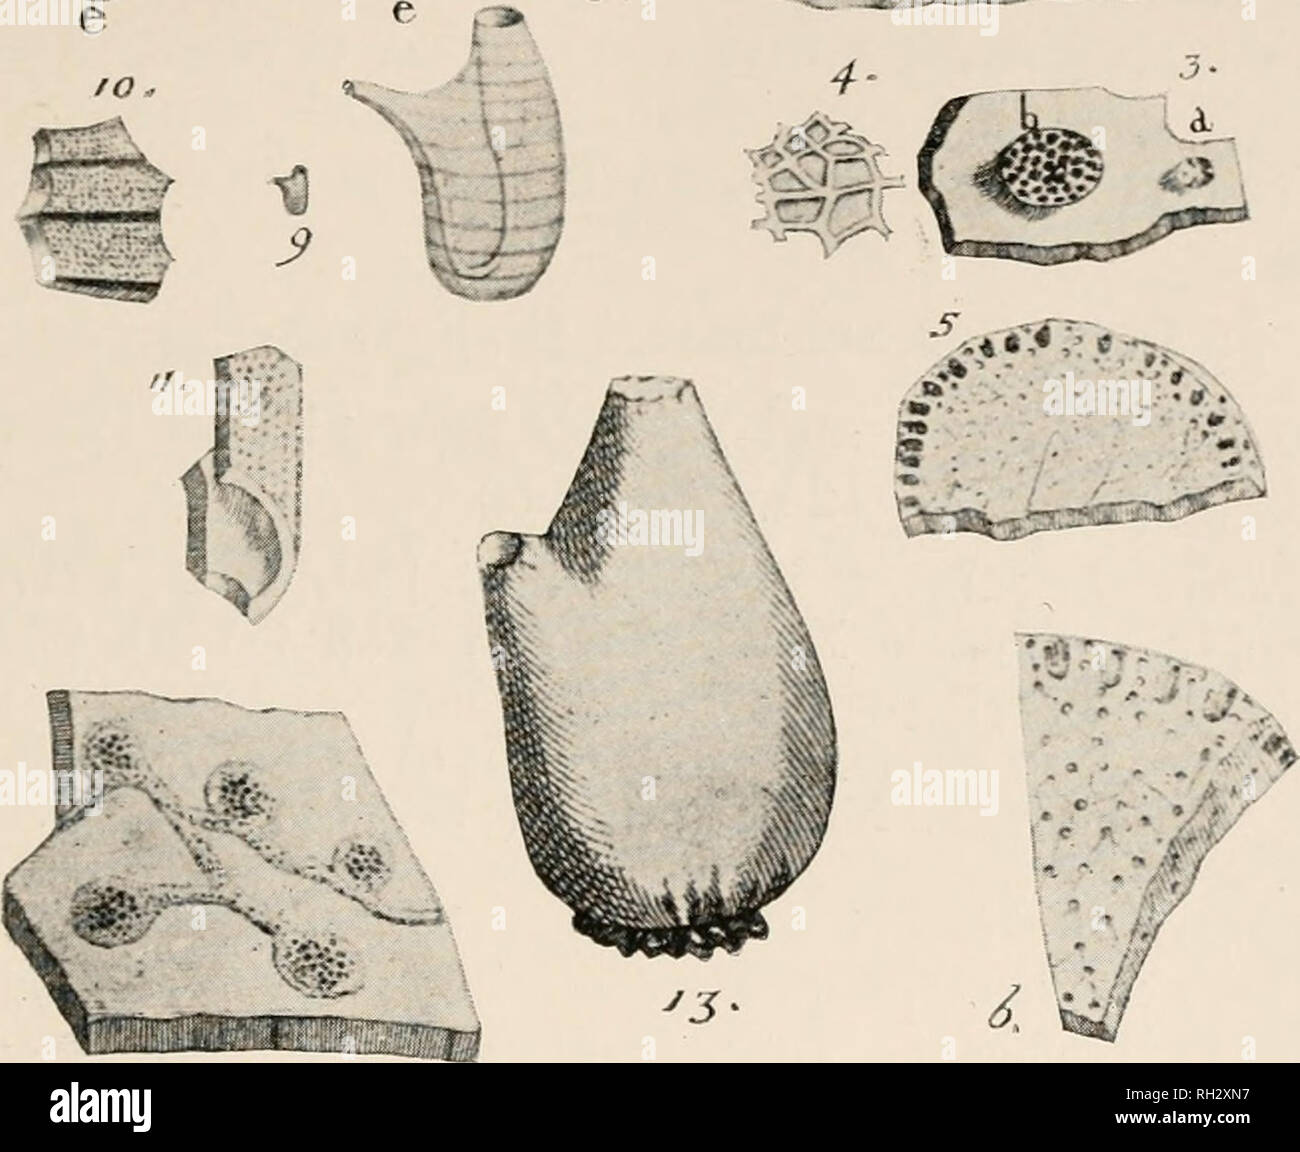 . The British Tunicata; an unfinished monograph. Sea squirts; Tunicata. rjrjj i T'... /a. IG. 115.—Structure of Botryllida). &quot;Botryllus stellatus&quot; Renier in 'Opusc. scelti Scienze.'xvi (1793),pi. i; PolycyclusRenieriLamarck in ' Mom. du Mas.' I (1815), p. 340. 1. A colony adhering- to two fronds of Zostera, natural size. 2. A system, enlarged, a, branchial apertures; b, common excretory orifice; e, individuals. 3. Part of the same, viewed from above, b, common excretory orifice; d, branchial aperture. 4. A portion of the net-like bottom of b, fi.i,f. 3, further enlarged. 5. Transvers Stock Photo